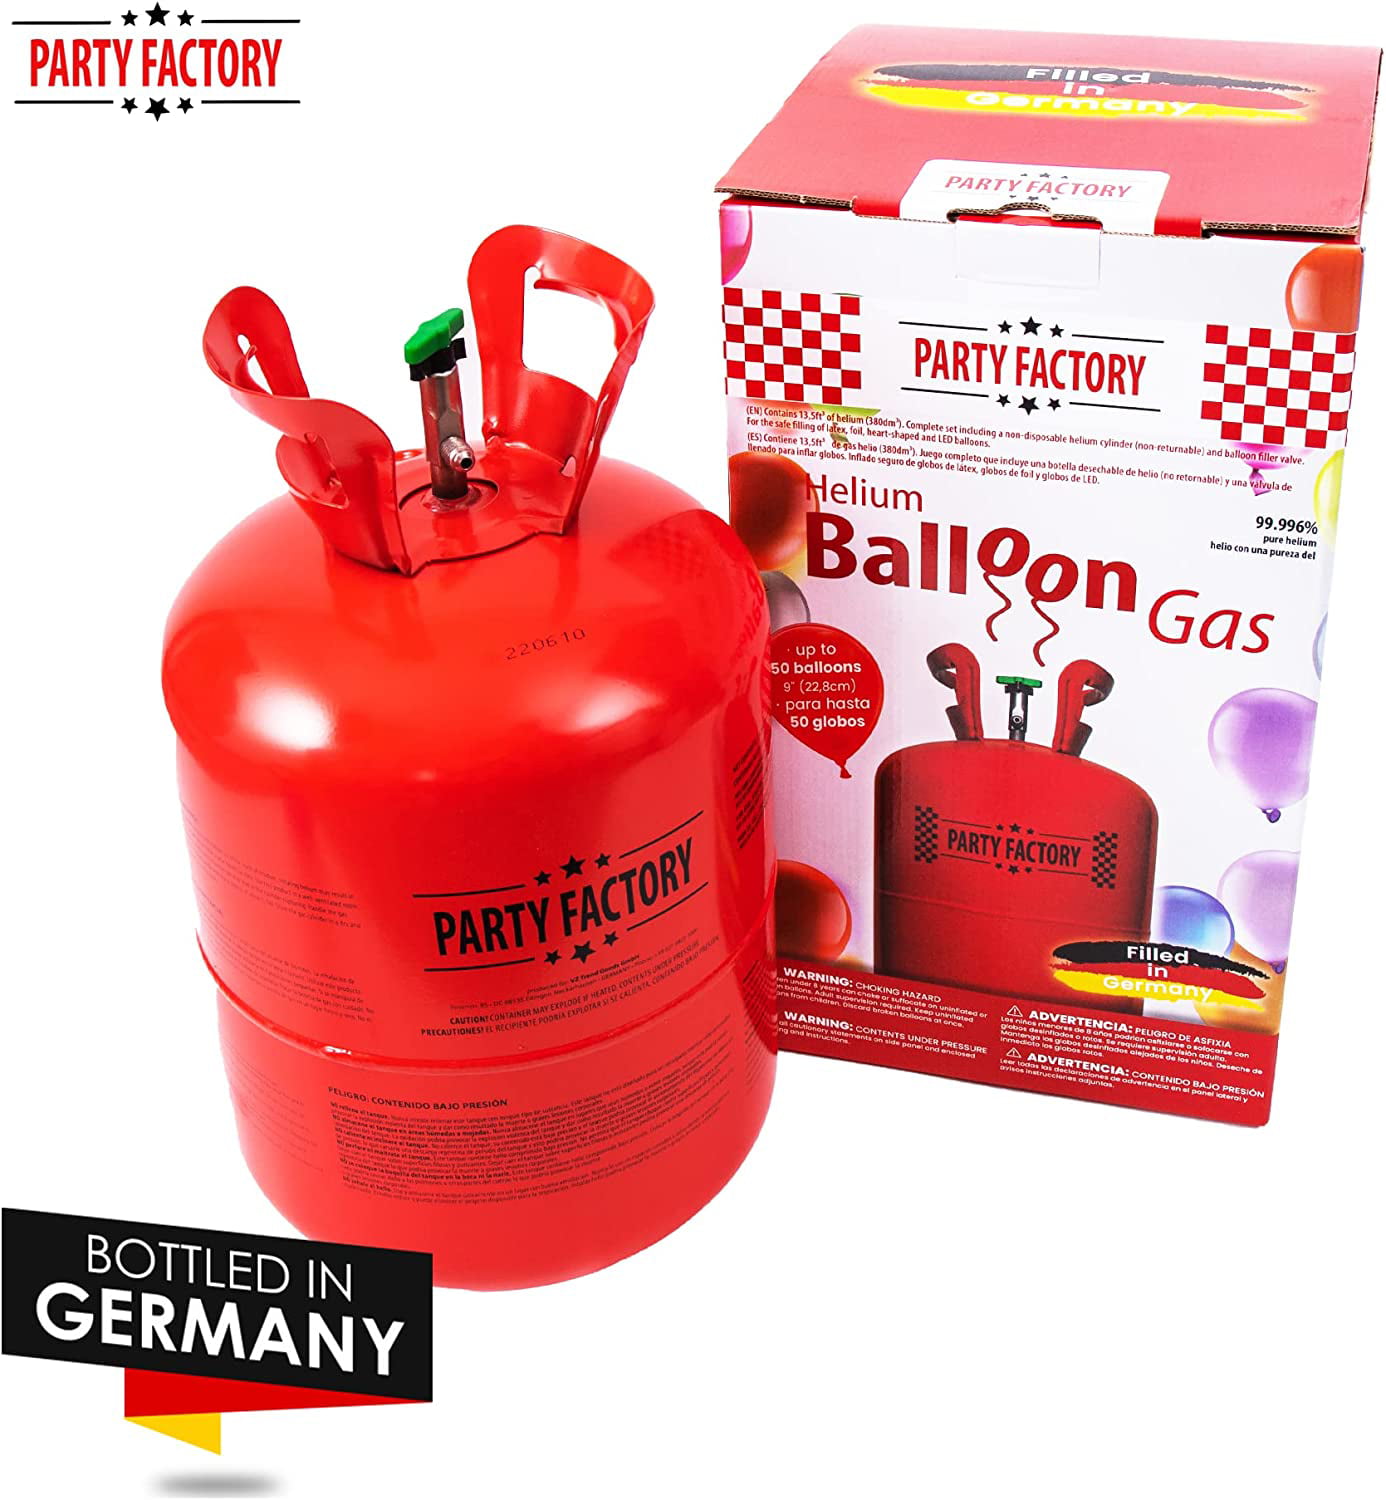 Party Factory Helium Tank for up to 30 Balloons incl. Latex Balloons,  Helium Cylinder 7 cu. ft. Gas with filling quantity for Balloons, Ideal for  Birthday Party, Wedding : Toys & Games 